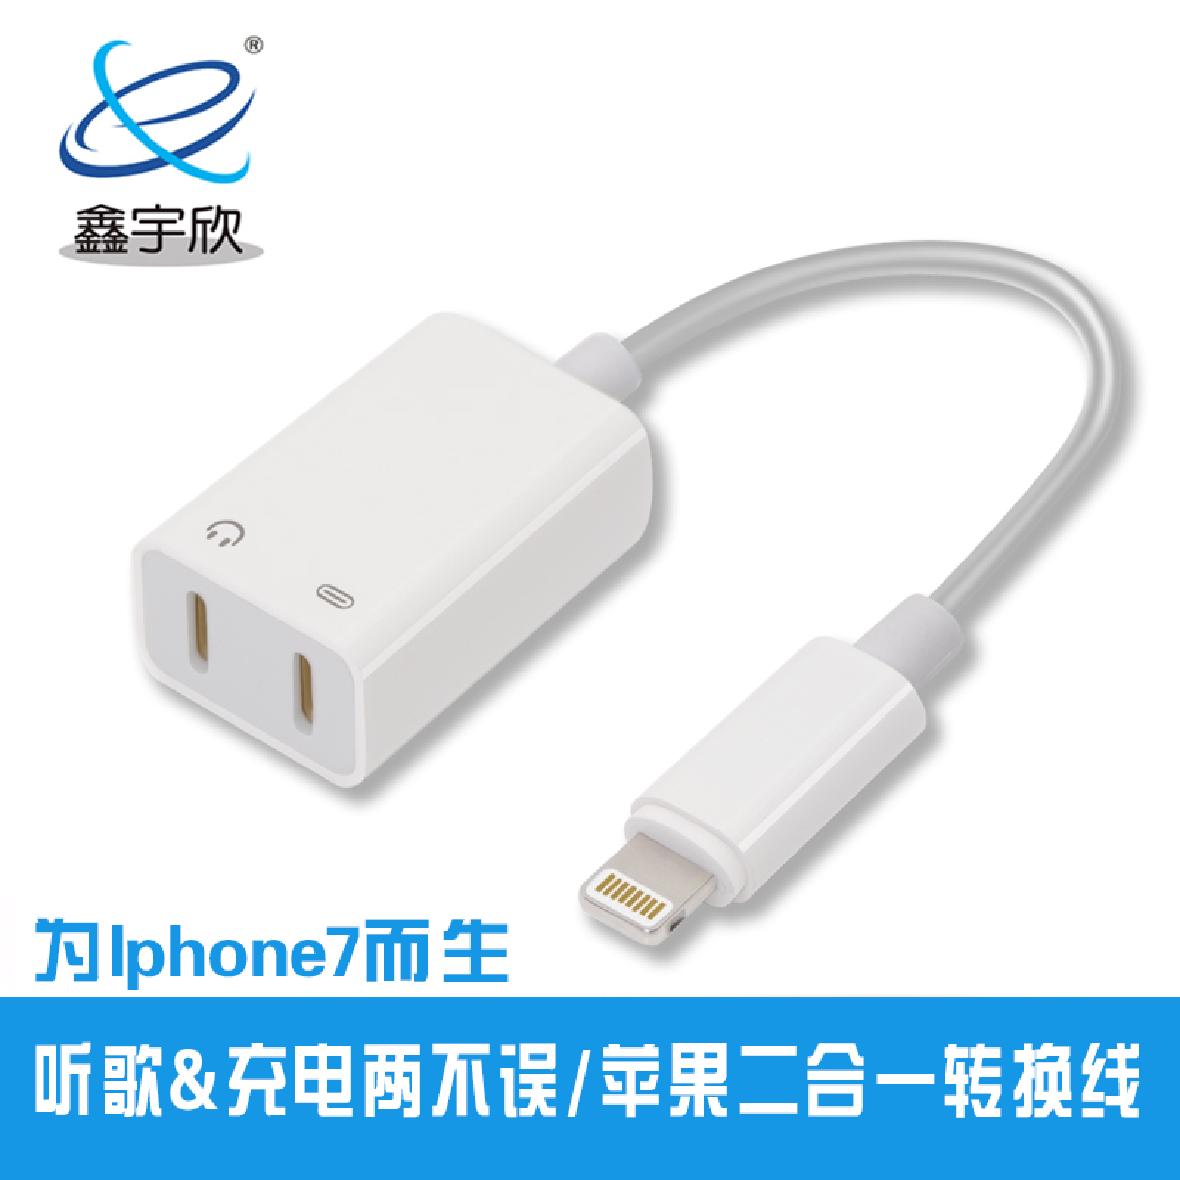  Apple 7 adapter cable dual Lightning interface adapter cable charging listening song two-in-one suitable for Apple X/iphone7/8